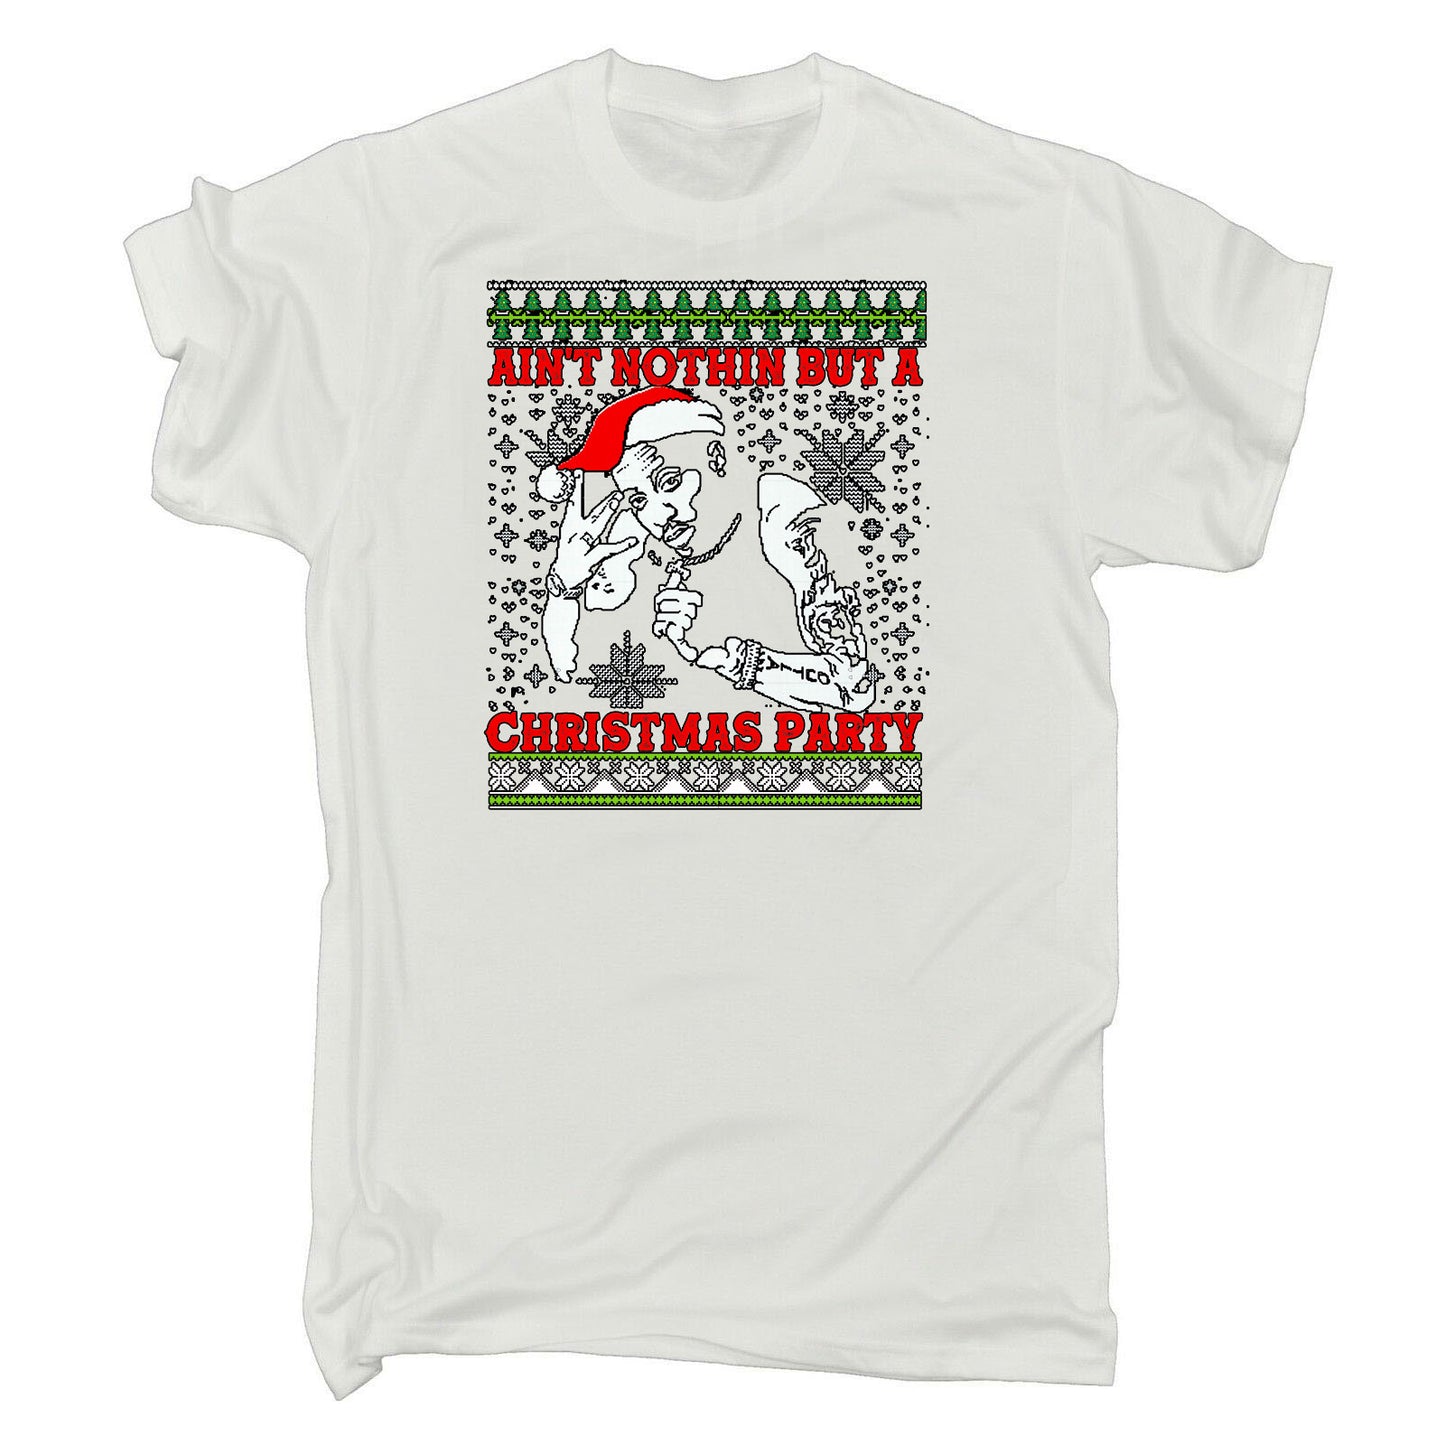 Ain Nothin But A Christmas Party Hip Hop Rapper - Mens Funny T-Shirt Tshirts